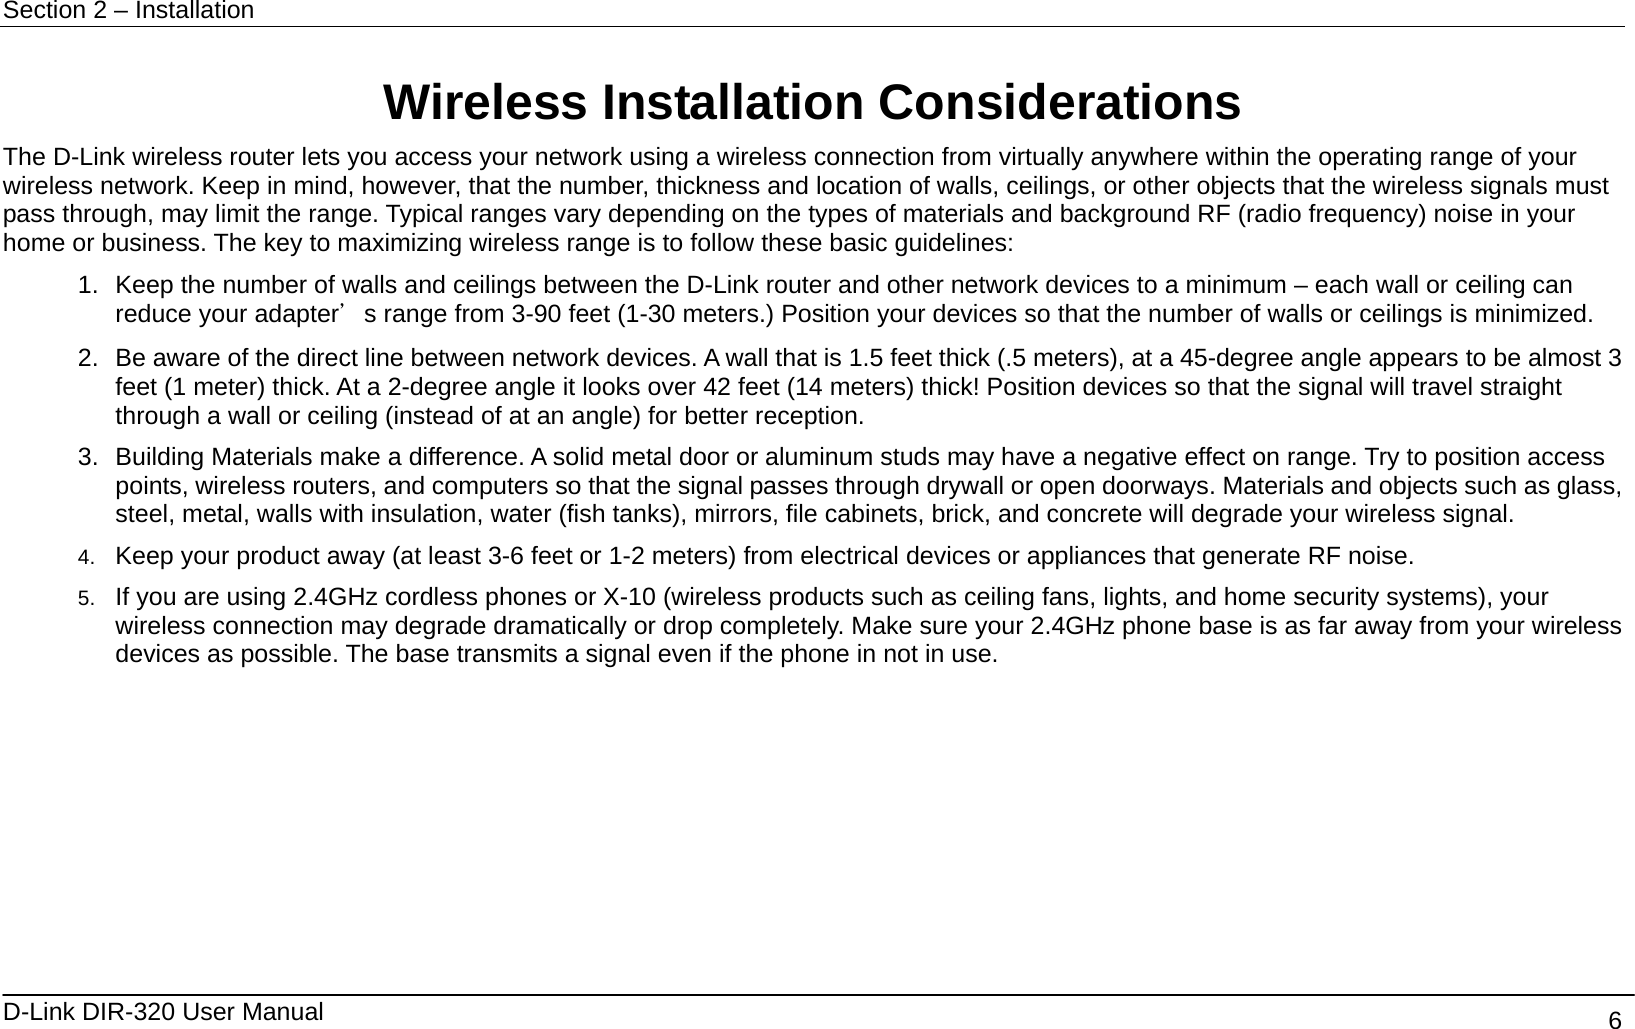 Section 2 – Installation   D-Link DIR-320 User Manual                                       6 Wireless Installation Considerations The D-Link wireless router lets you access your network using a wireless connection from virtually anywhere within the operating range of your wireless network. Keep in mind, however, that the number, thickness and location of walls, ceilings, or other objects that the wireless signals must pass through, may limit the range. Typical ranges vary depending on the types of materials and background RF (radio frequency) noise in your home or business. The key to maximizing wireless range is to follow these basic guidelines: 1.  Keep the number of walls and ceilings between the D-Link router and other network devices to a minimum – each wall or ceiling can reduce your adapter＇s range from 3-90 feet (1-30 meters.) Position your devices so that the number of walls or ceilings is minimized. 2.  Be aware of the direct line between network devices. A wall that is 1.5 feet thick (.5 meters), at a 45-degree angle appears to be almost 3 feet (1 meter) thick. At a 2-degree angle it looks over 42 feet (14 meters) thick! Position devices so that the signal will travel straight through a wall or ceiling (instead of at an angle) for better reception. 3.  Building Materials make a difference. A solid metal door or aluminum studs may have a negative effect on range. Try to position access points, wireless routers, and computers so that the signal passes through drywall or open doorways. Materials and objects such as glass, steel, metal, walls with insulation, water (fish tanks), mirrors, file cabinets, brick, and concrete will degrade your wireless signal. 4.  Keep your product away (at least 3-6 feet or 1-2 meters) from electrical devices or appliances that generate RF noise. 5.  If you are using 2.4GHz cordless phones or X-10 (wireless products such as ceiling fans, lights, and home security systems), your wireless connection may degrade dramatically or drop completely. Make sure your 2.4GHz phone base is as far away from your wireless devices as possible. The base transmits a signal even if the phone in not in use.  